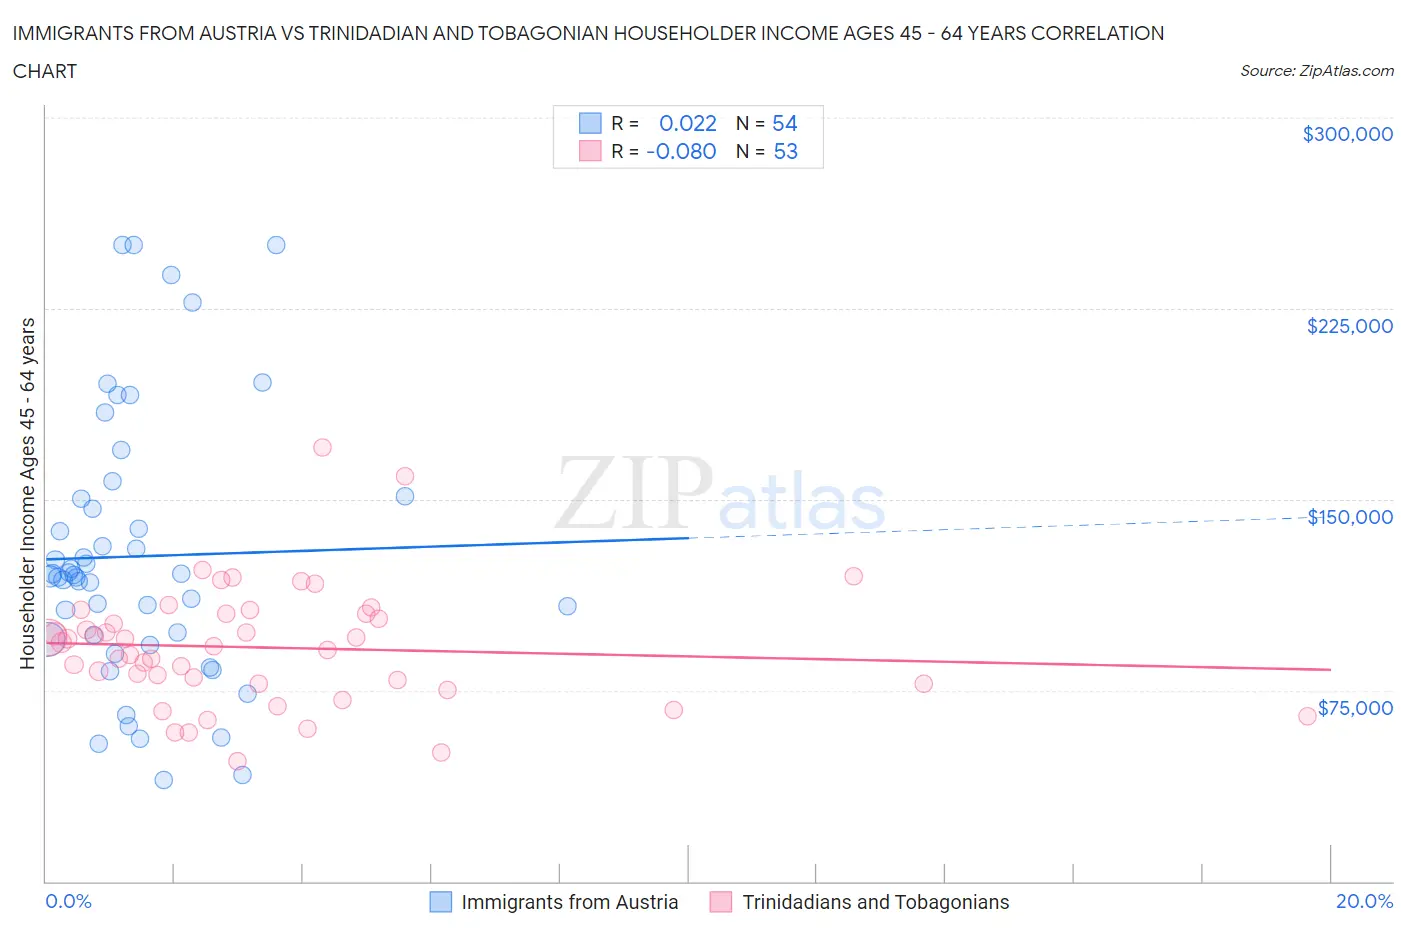 Immigrants from Austria vs Trinidadian and Tobagonian Householder Income Ages 45 - 64 years